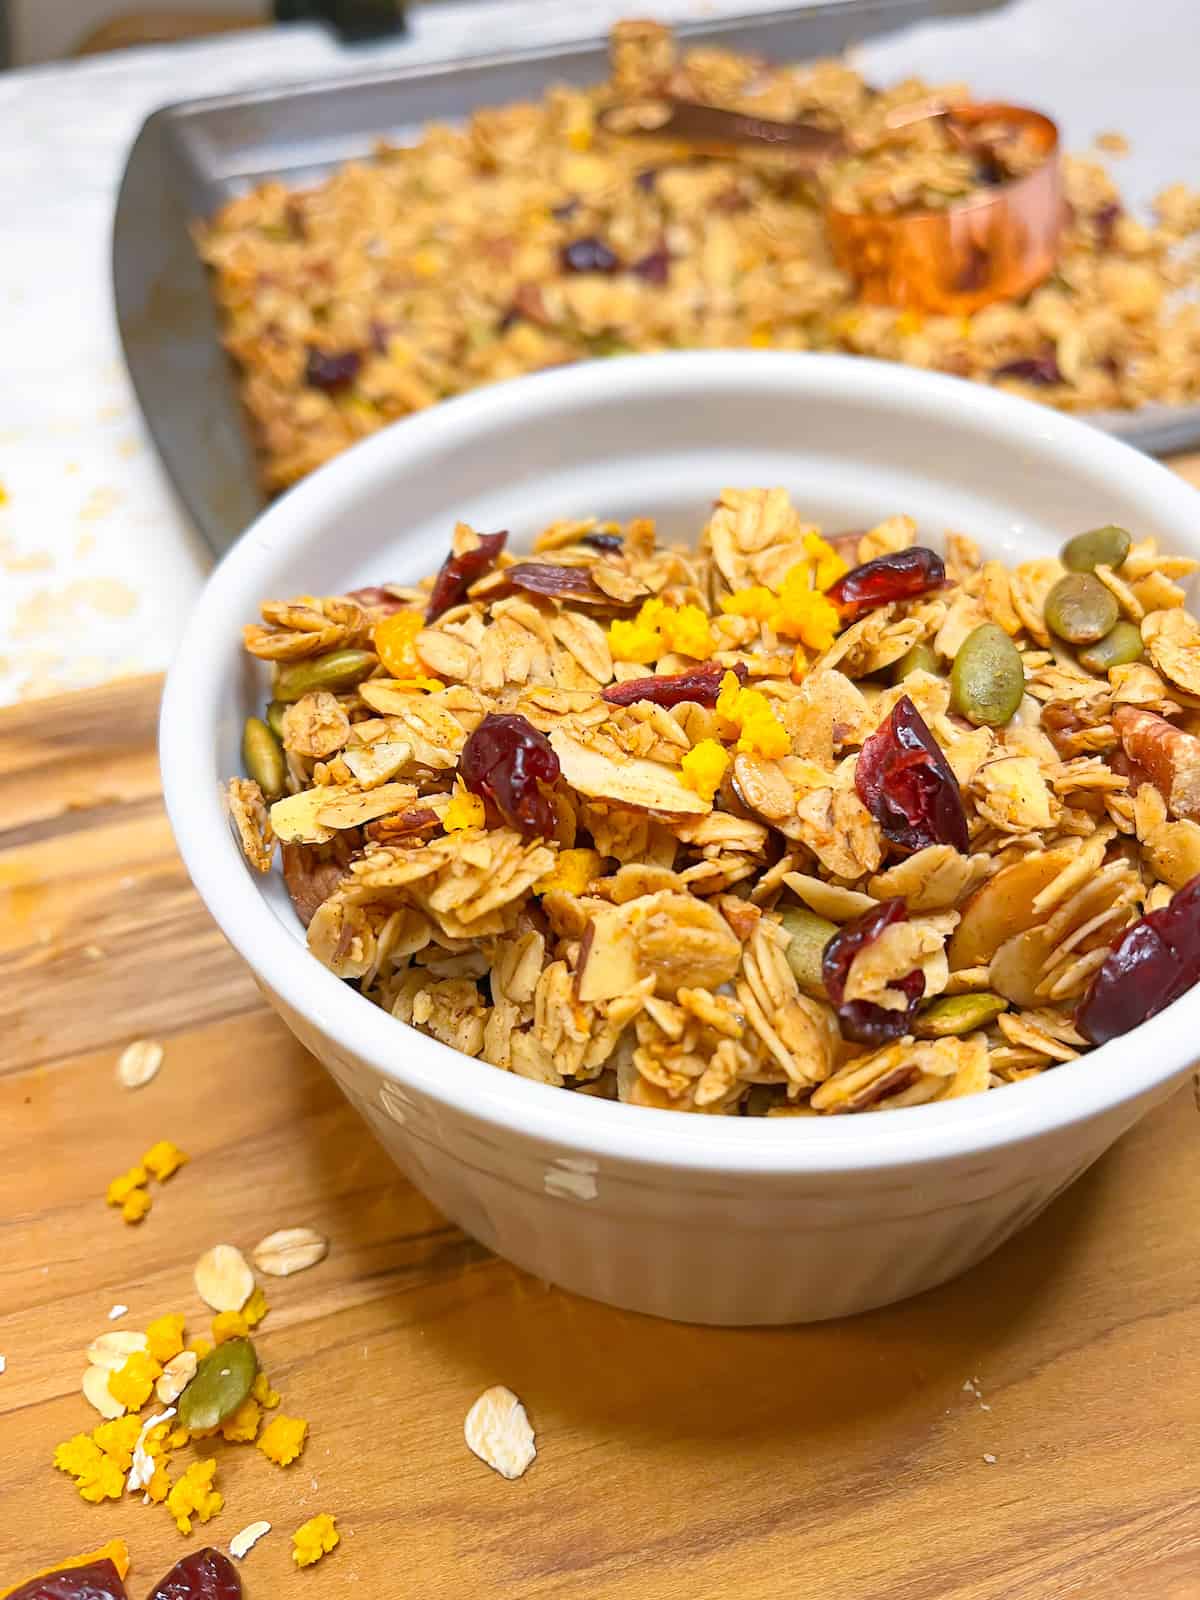 Orange granola with cranberries and pecans in a white bowl with more homemade granola on a baking sheet in the background